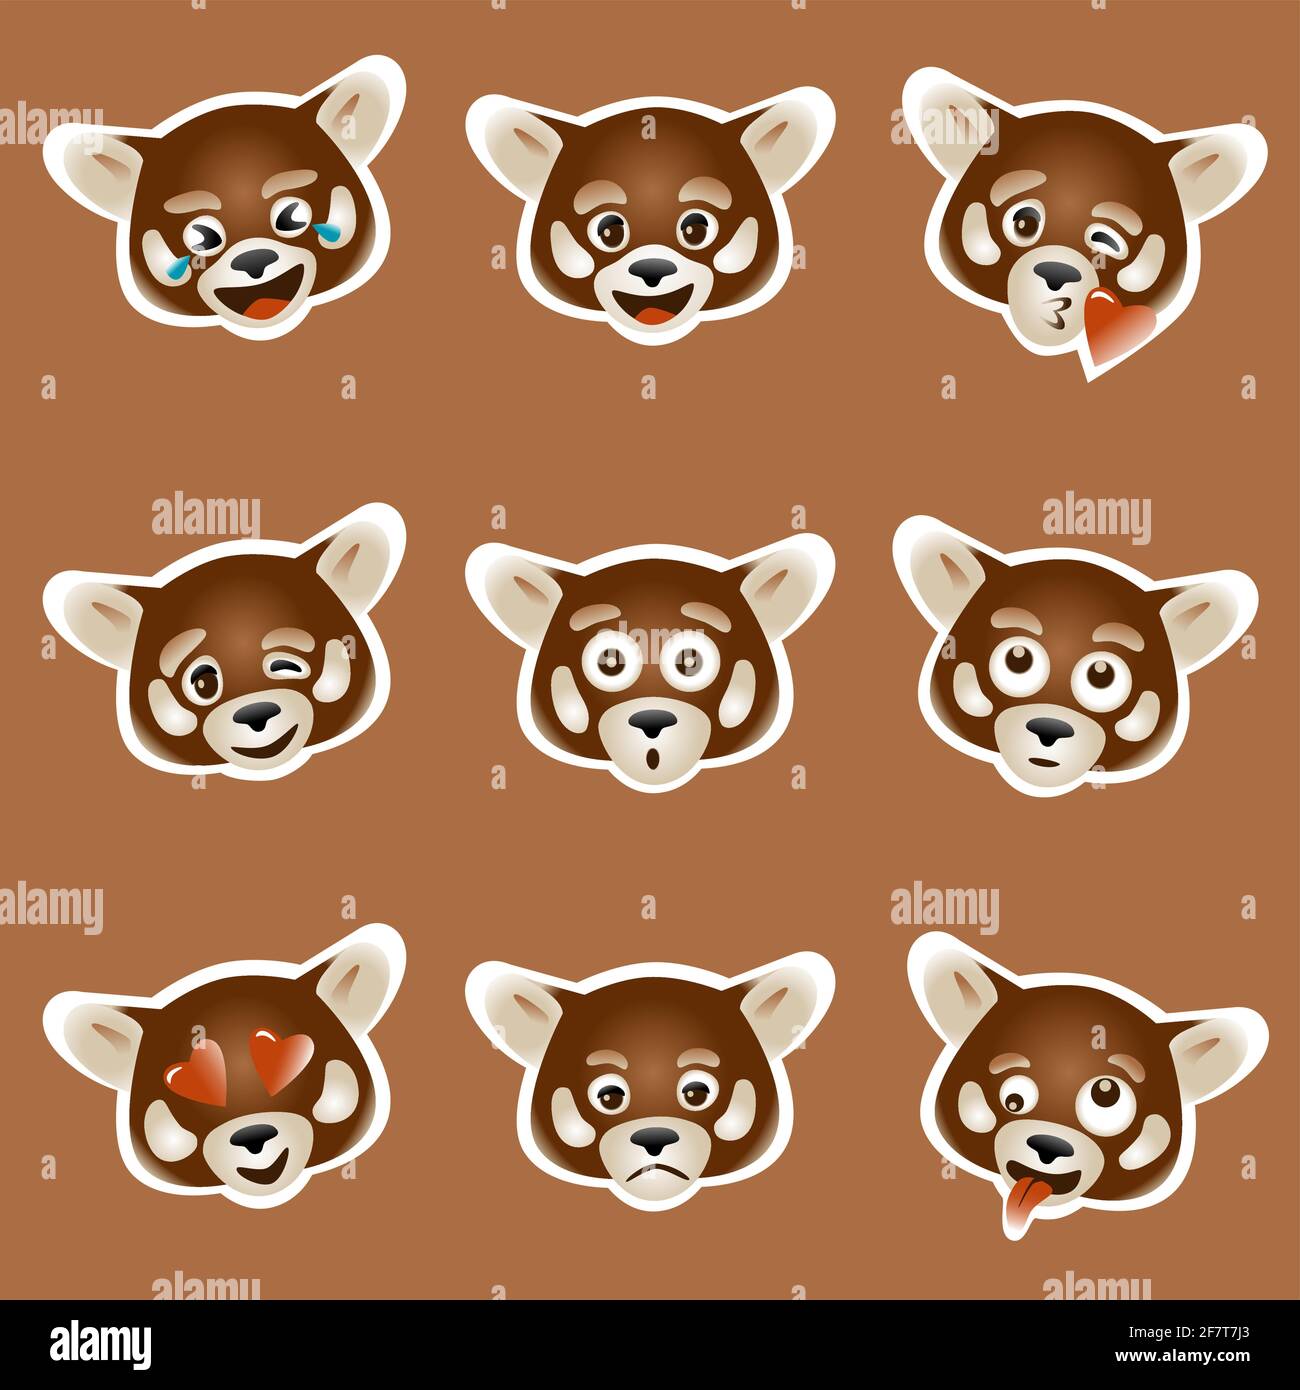 set of 9 vector emoji with red panda face , colored Stock Vector